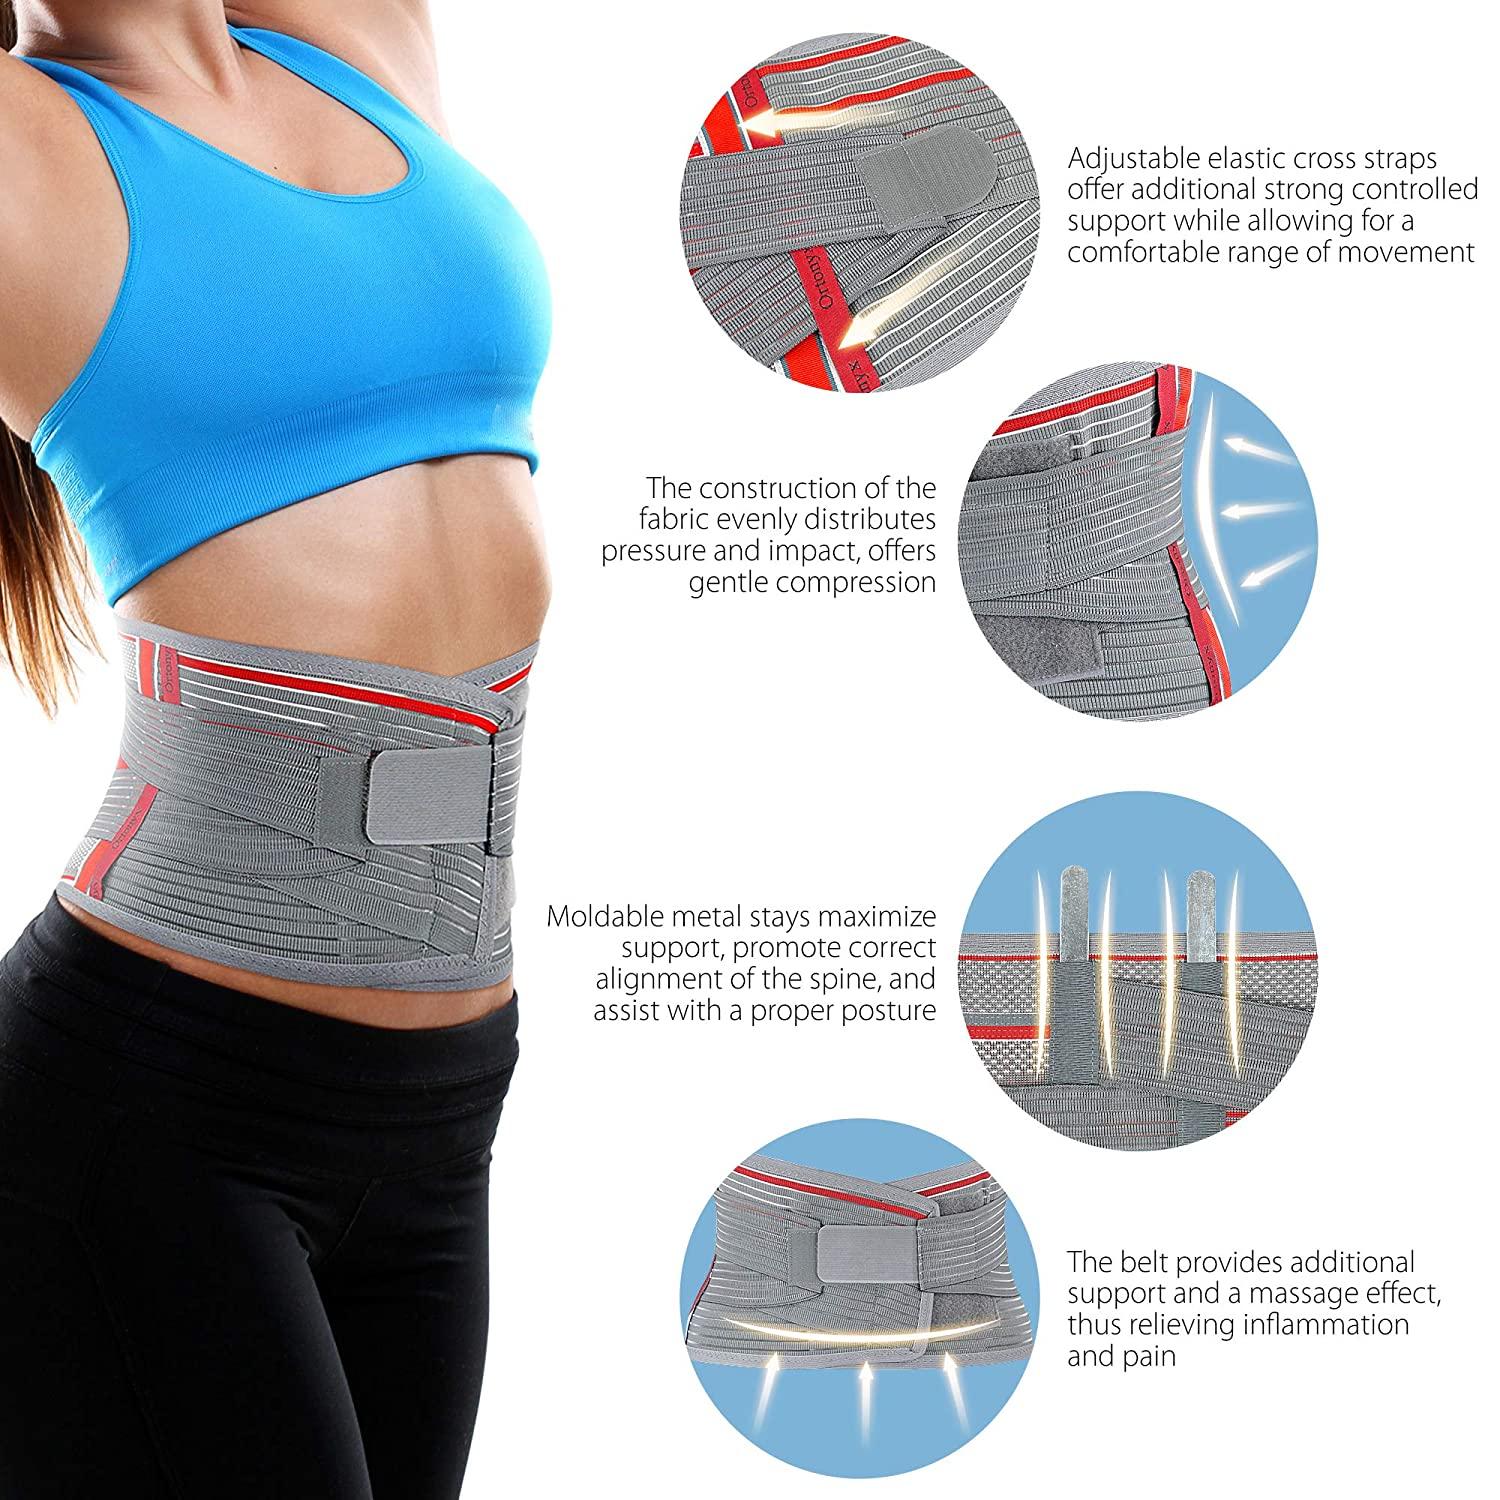 ORTONYX Lumbar Support Belt Lumbosacral Back Brace Ergonomic Design and  Breathable Material - lower back pain relief warmer stretcher - M/L (Waist  31.5-39.4) Gray/Red Medium/Large (Pack of 1) Gray/Red